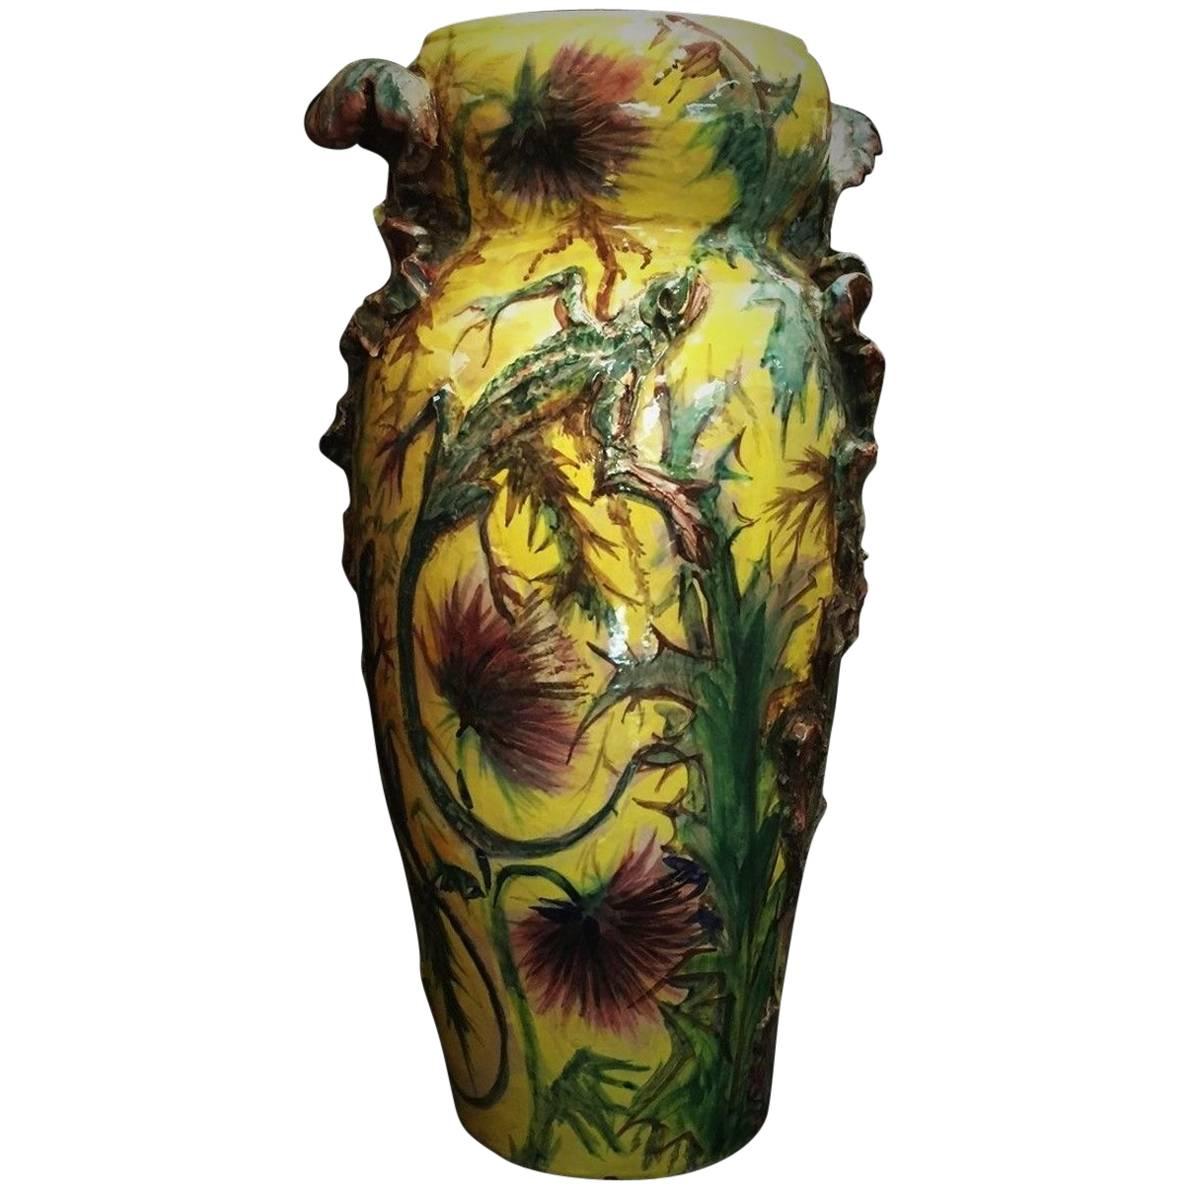 French Art Nouveau Majolica Vase with Thistles and Lizards, circa 1900 For Sale